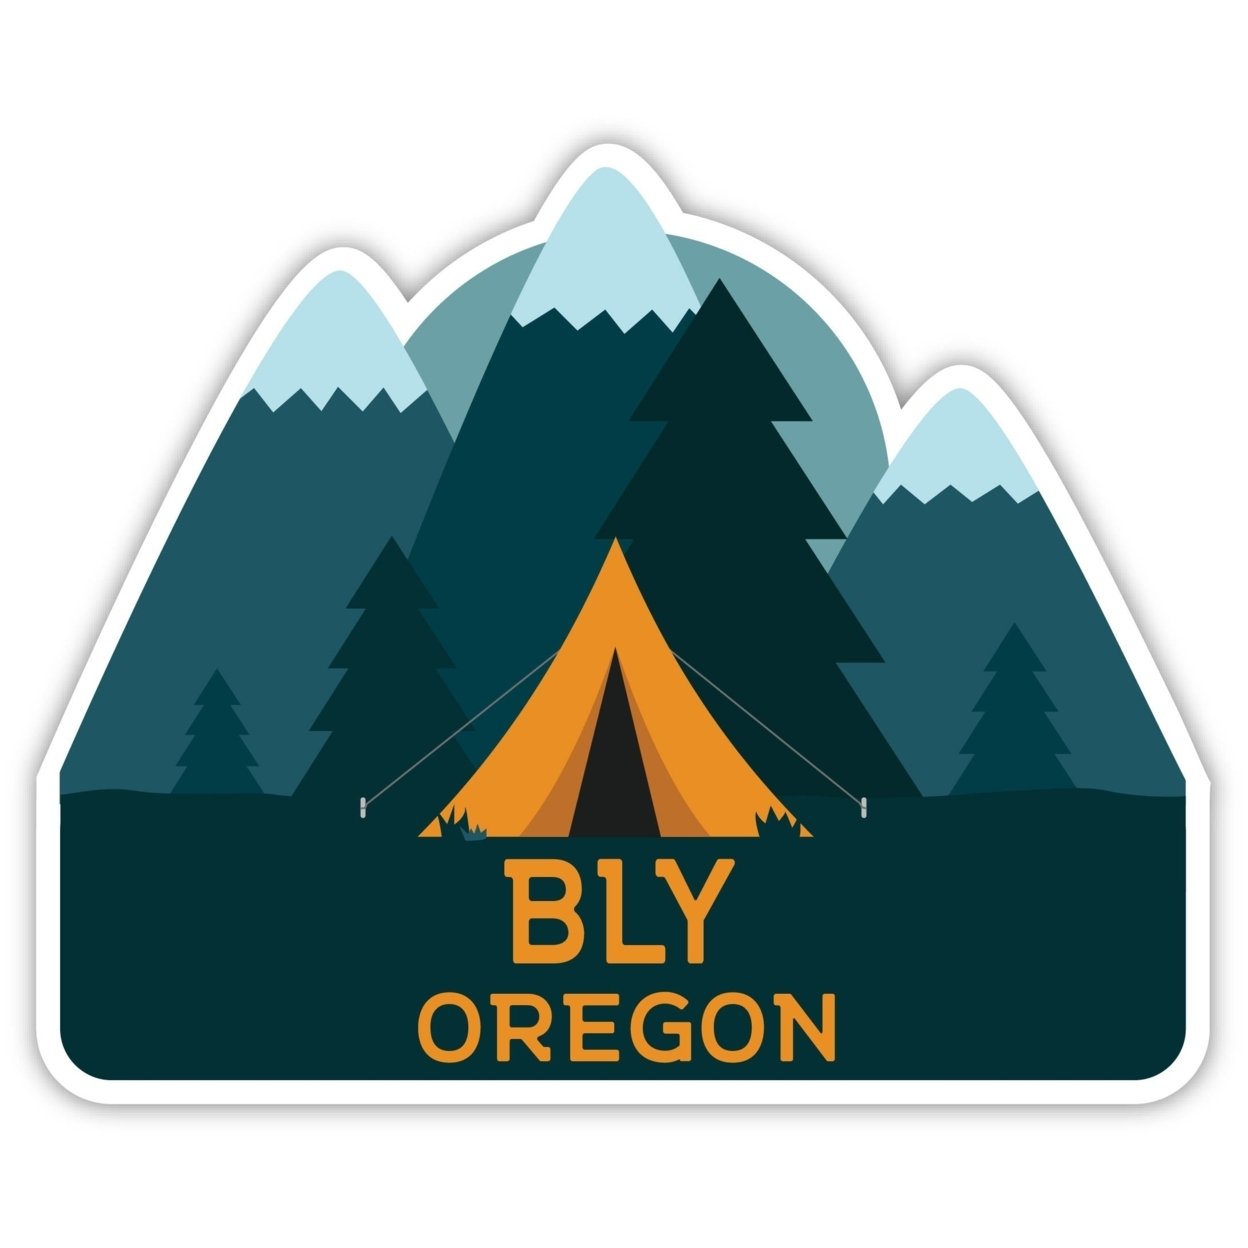 Bly Oregon Souvenir Decorative Stickers (Choose Theme And Size) - 4-Pack, 8-Inch, Tent